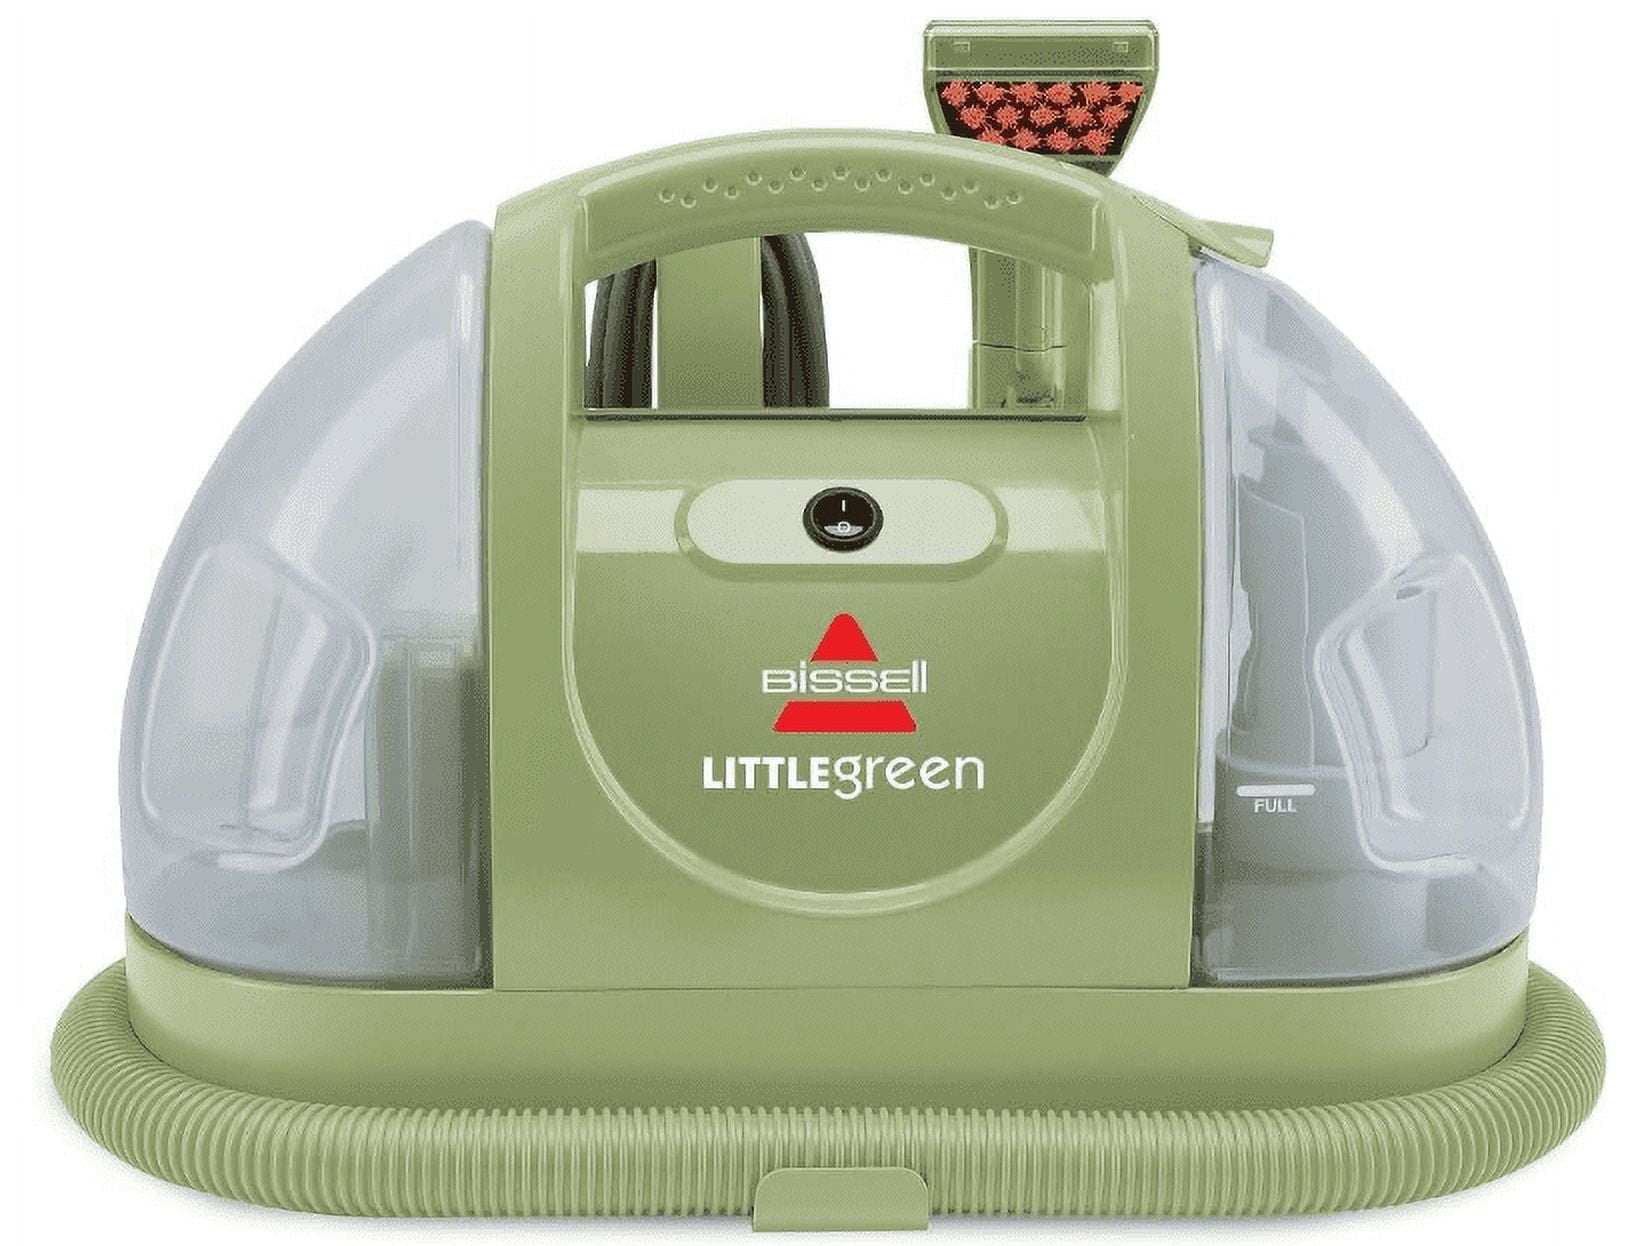 Bissell Little Green Multi-Purpose Portable Carpet and Upholstery Cleaner  with Exclusive Specialty Tools - Green 